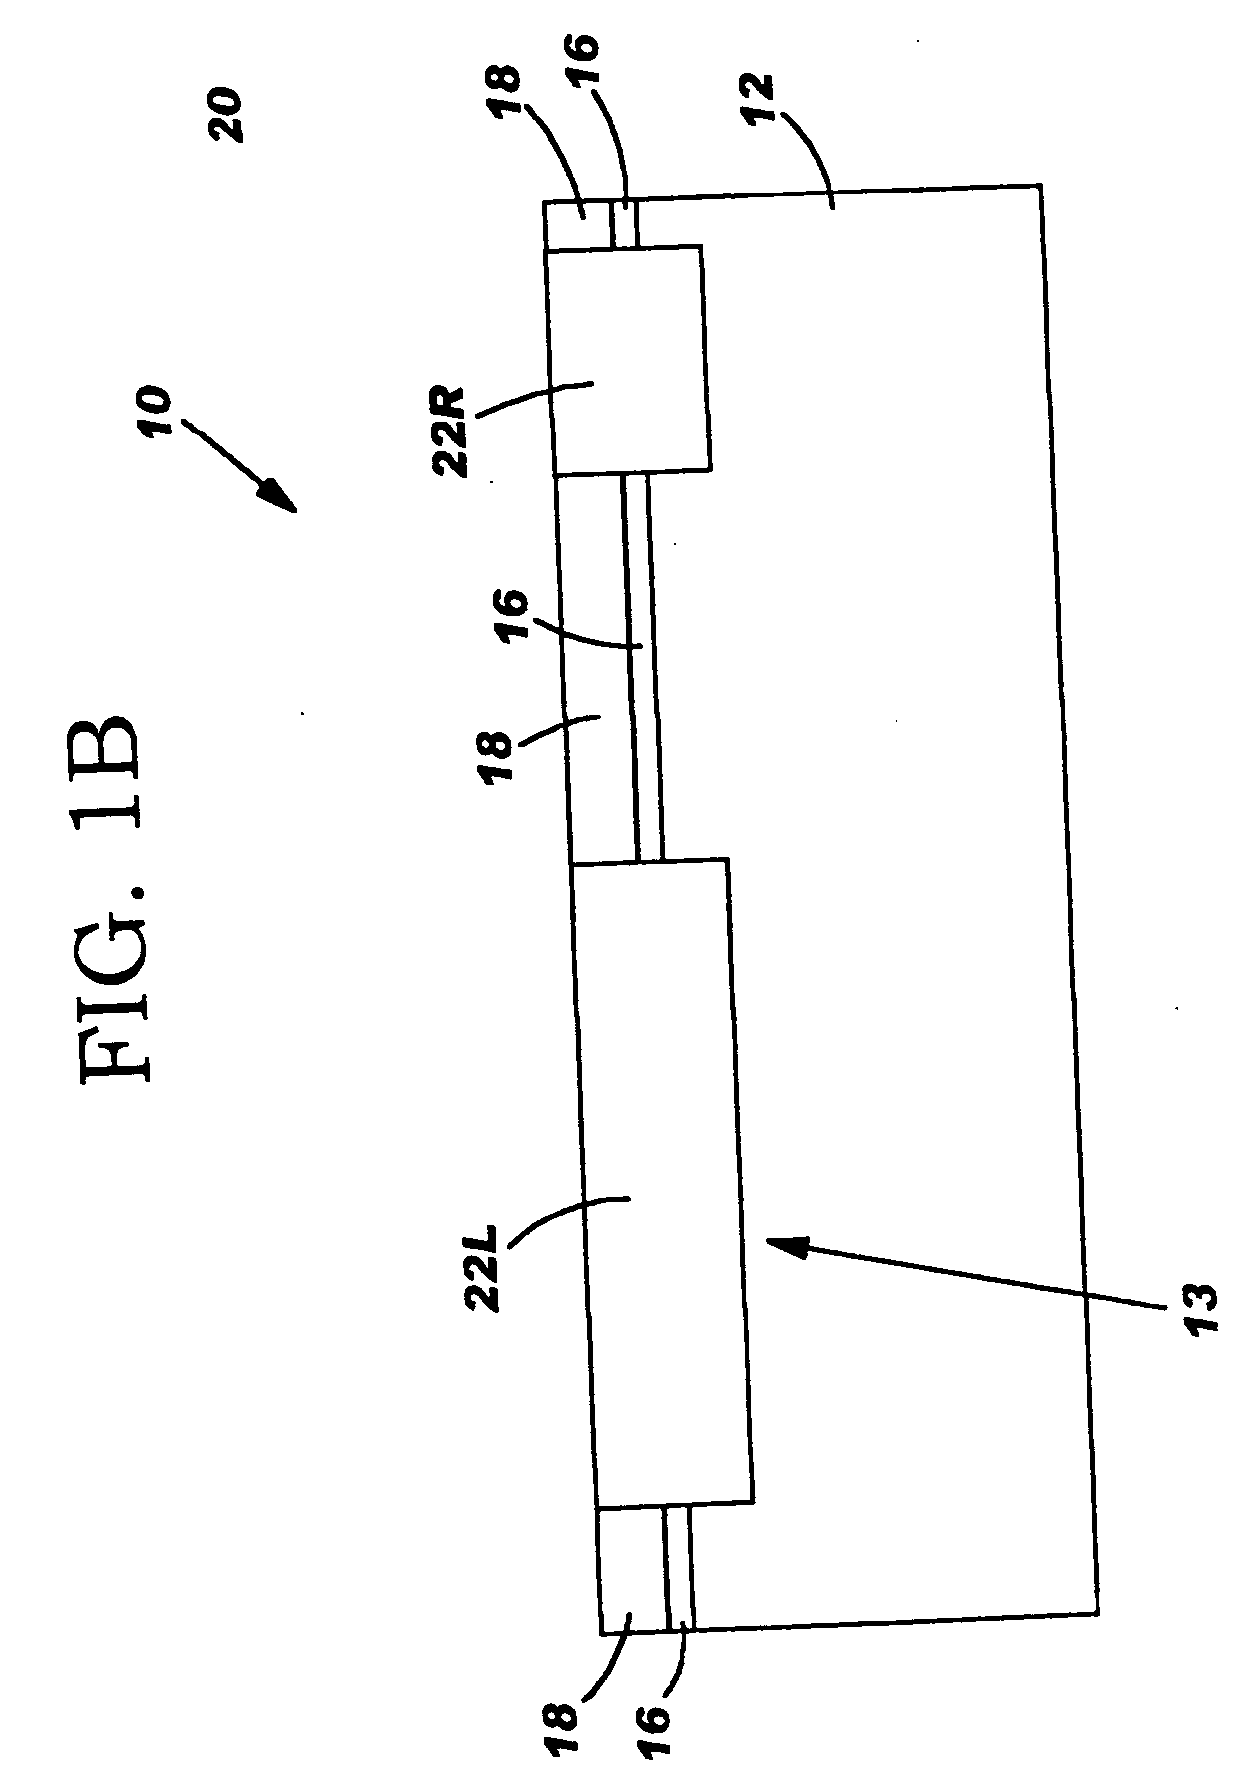 Method of collector formation in BiCMOS technology